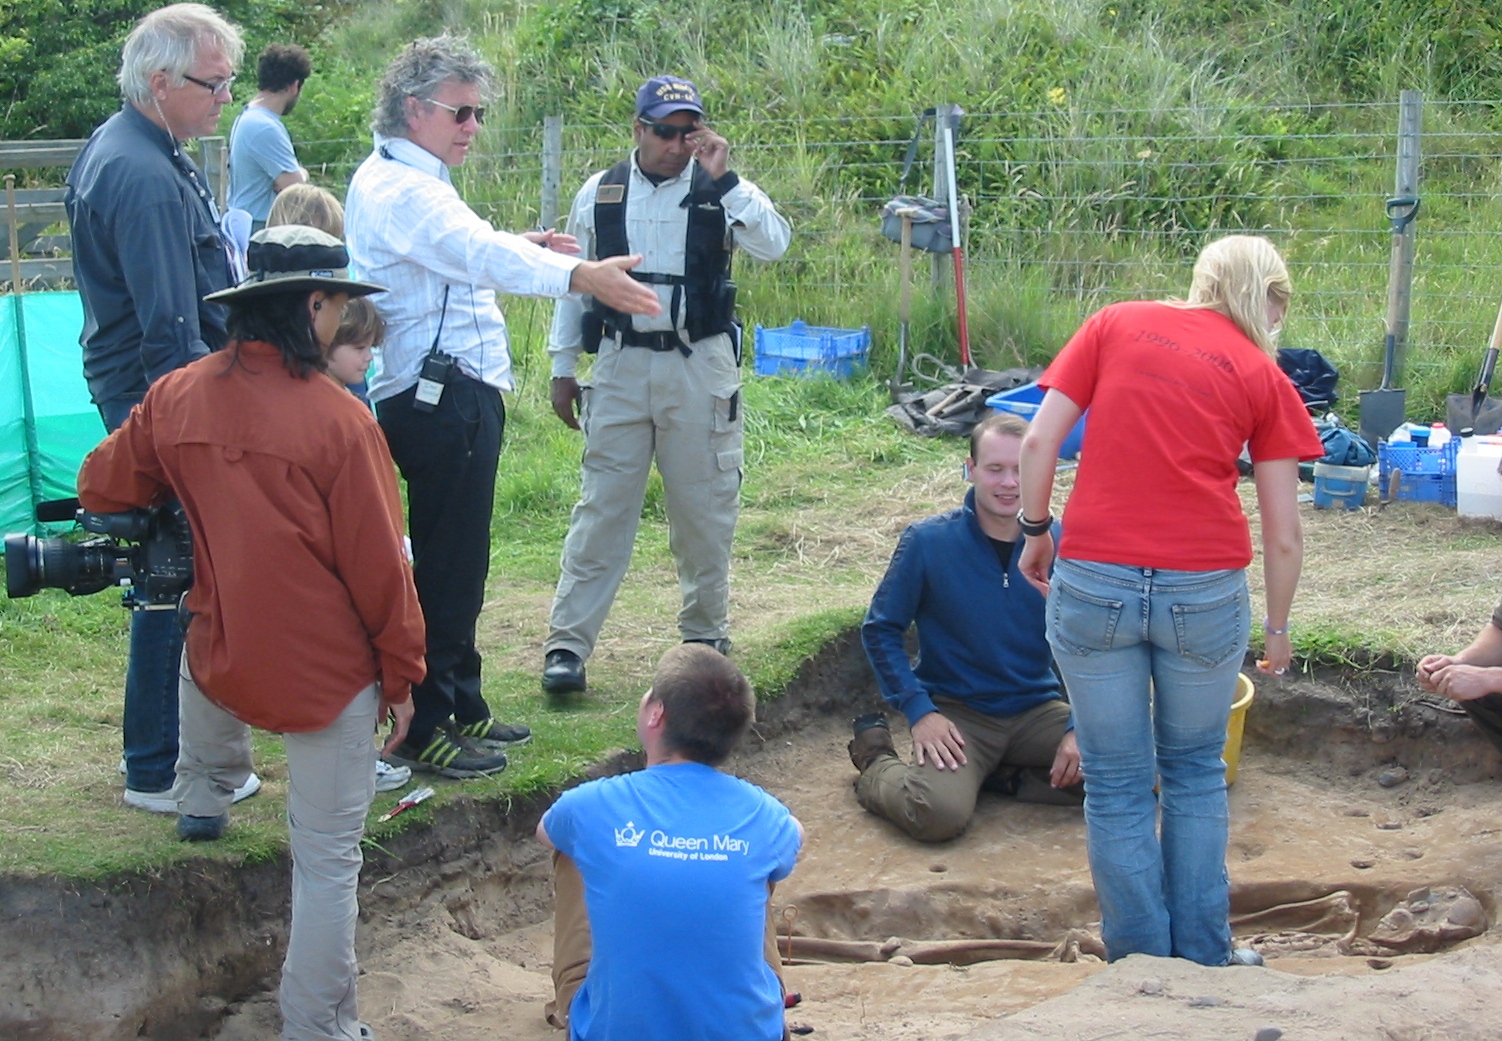 TV director Ian Stevenson (in white shirt) directs The Discovery Channel's 'Bone Detectives' in northern England. Host Scotty Moore kneels beside mummy. More at www.ianstevenson.tv